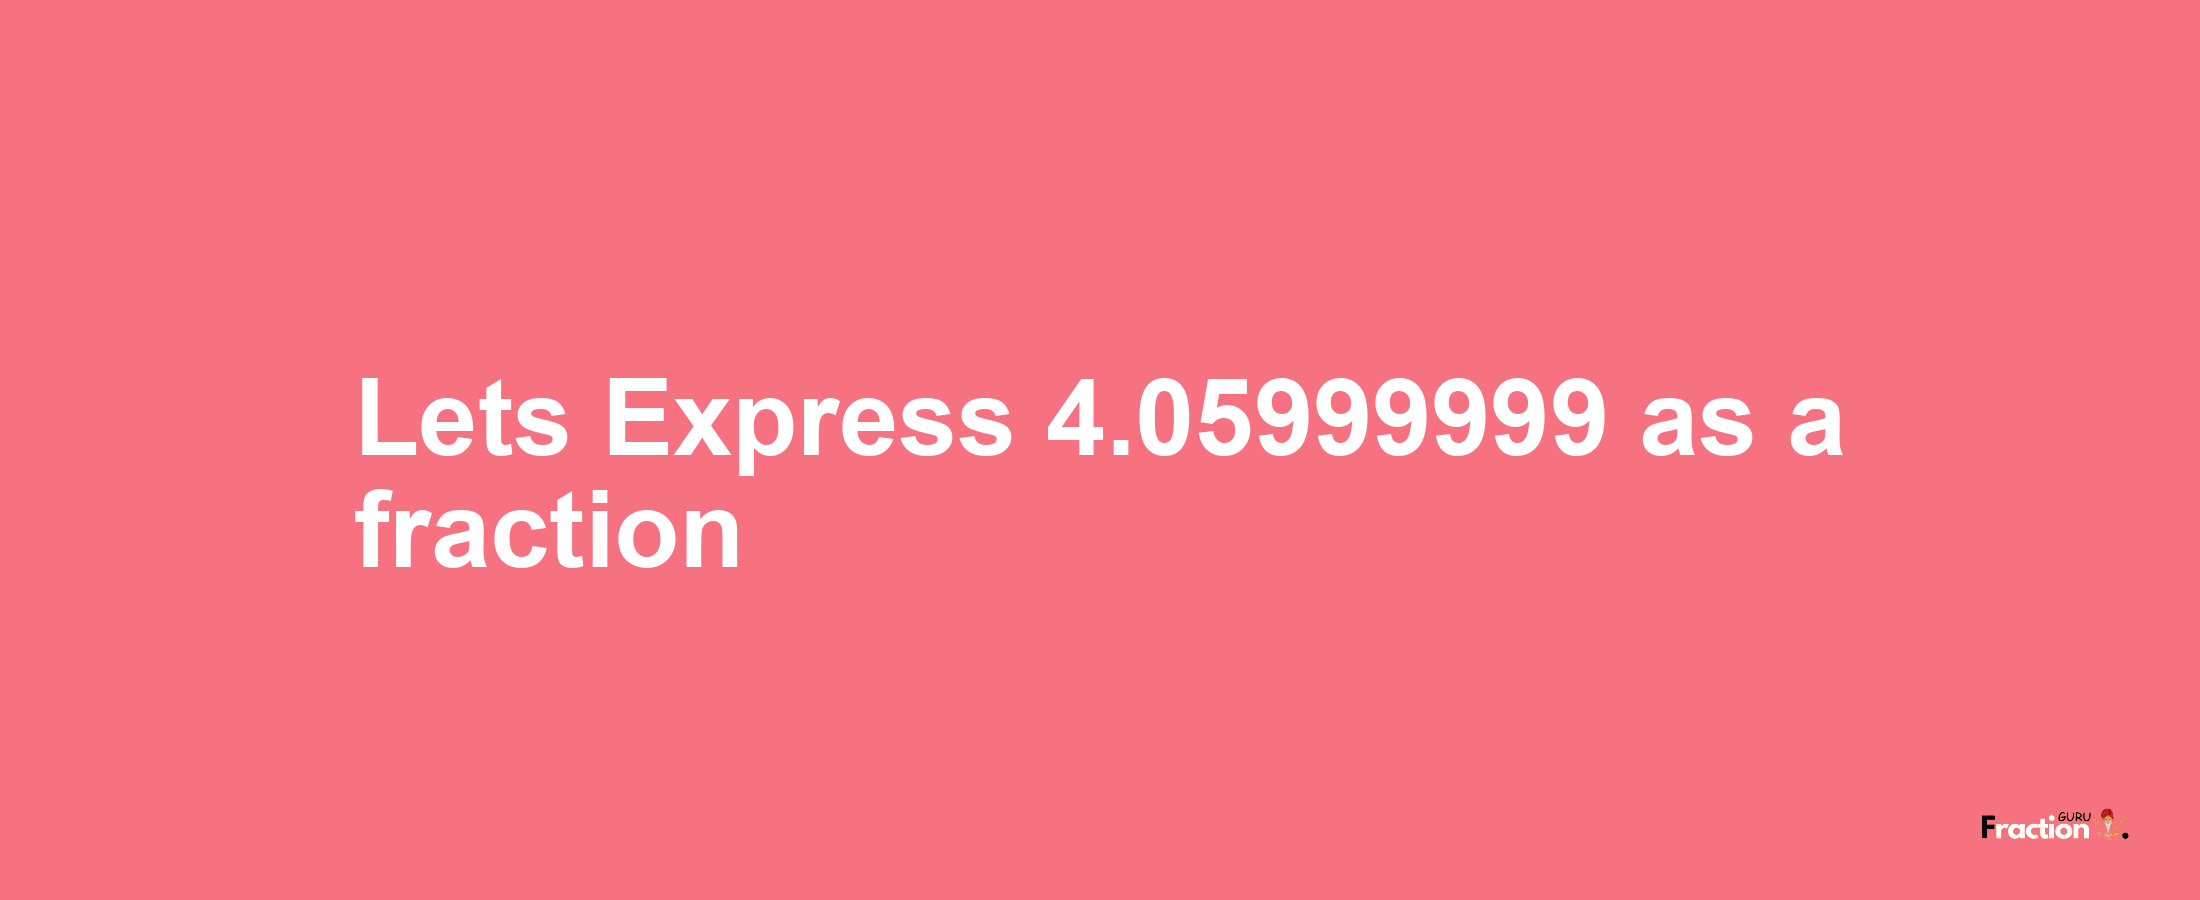 Lets Express 4.05999999 as afraction